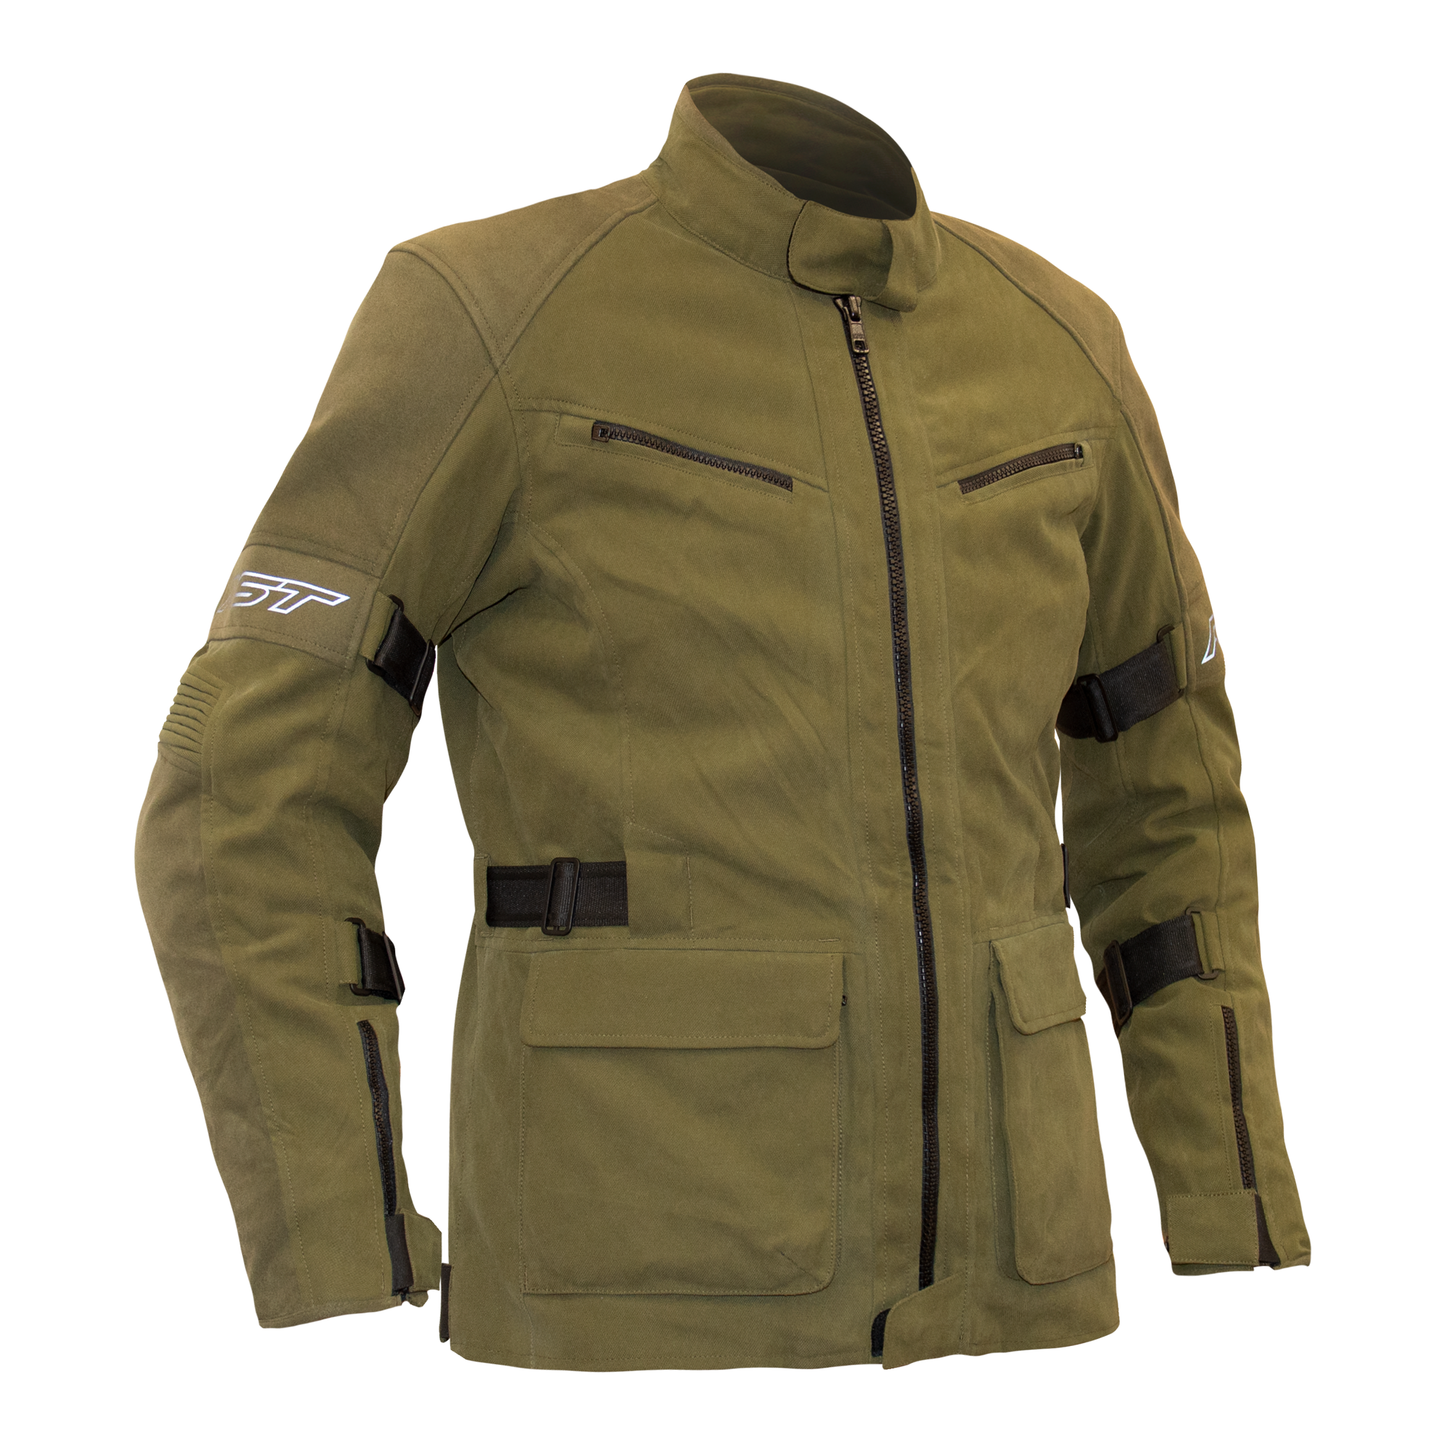 RST Pro Series RAID Textile Riding/Racing Jacket - CE Approved - Military Green